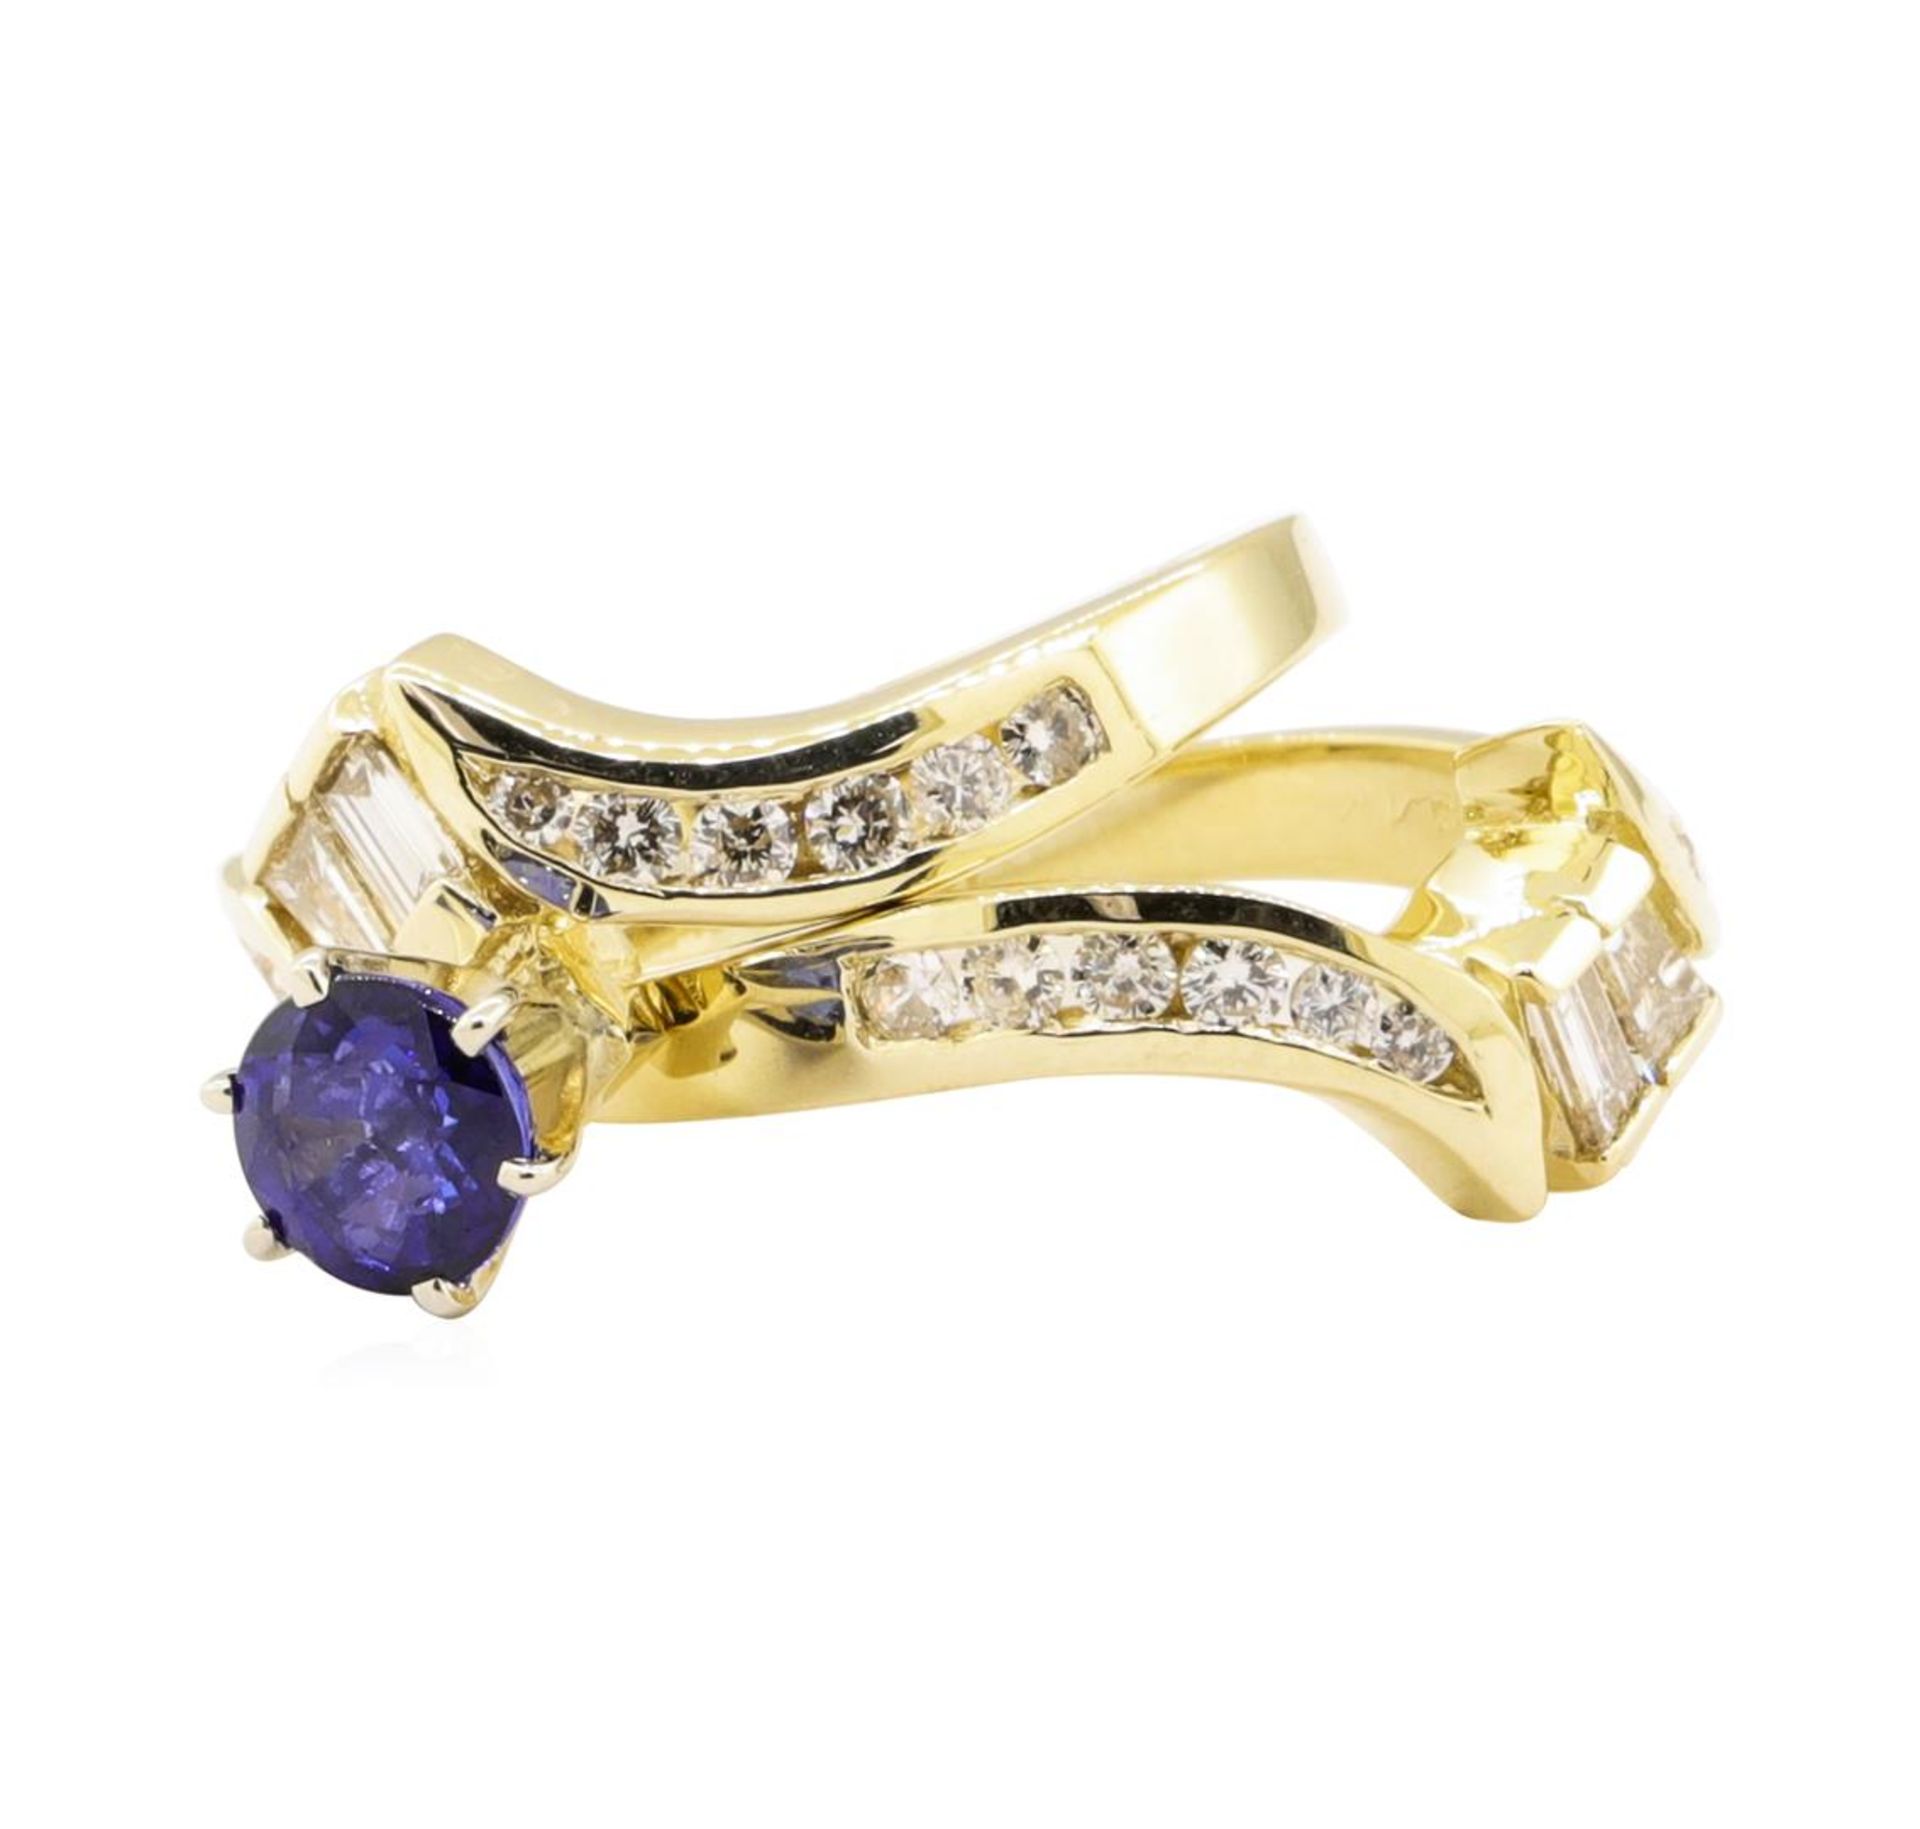 1.61 ctw Blue Sapphire And Diamond Ring And Band - 14KT Yellow Gold - Image 3 of 4